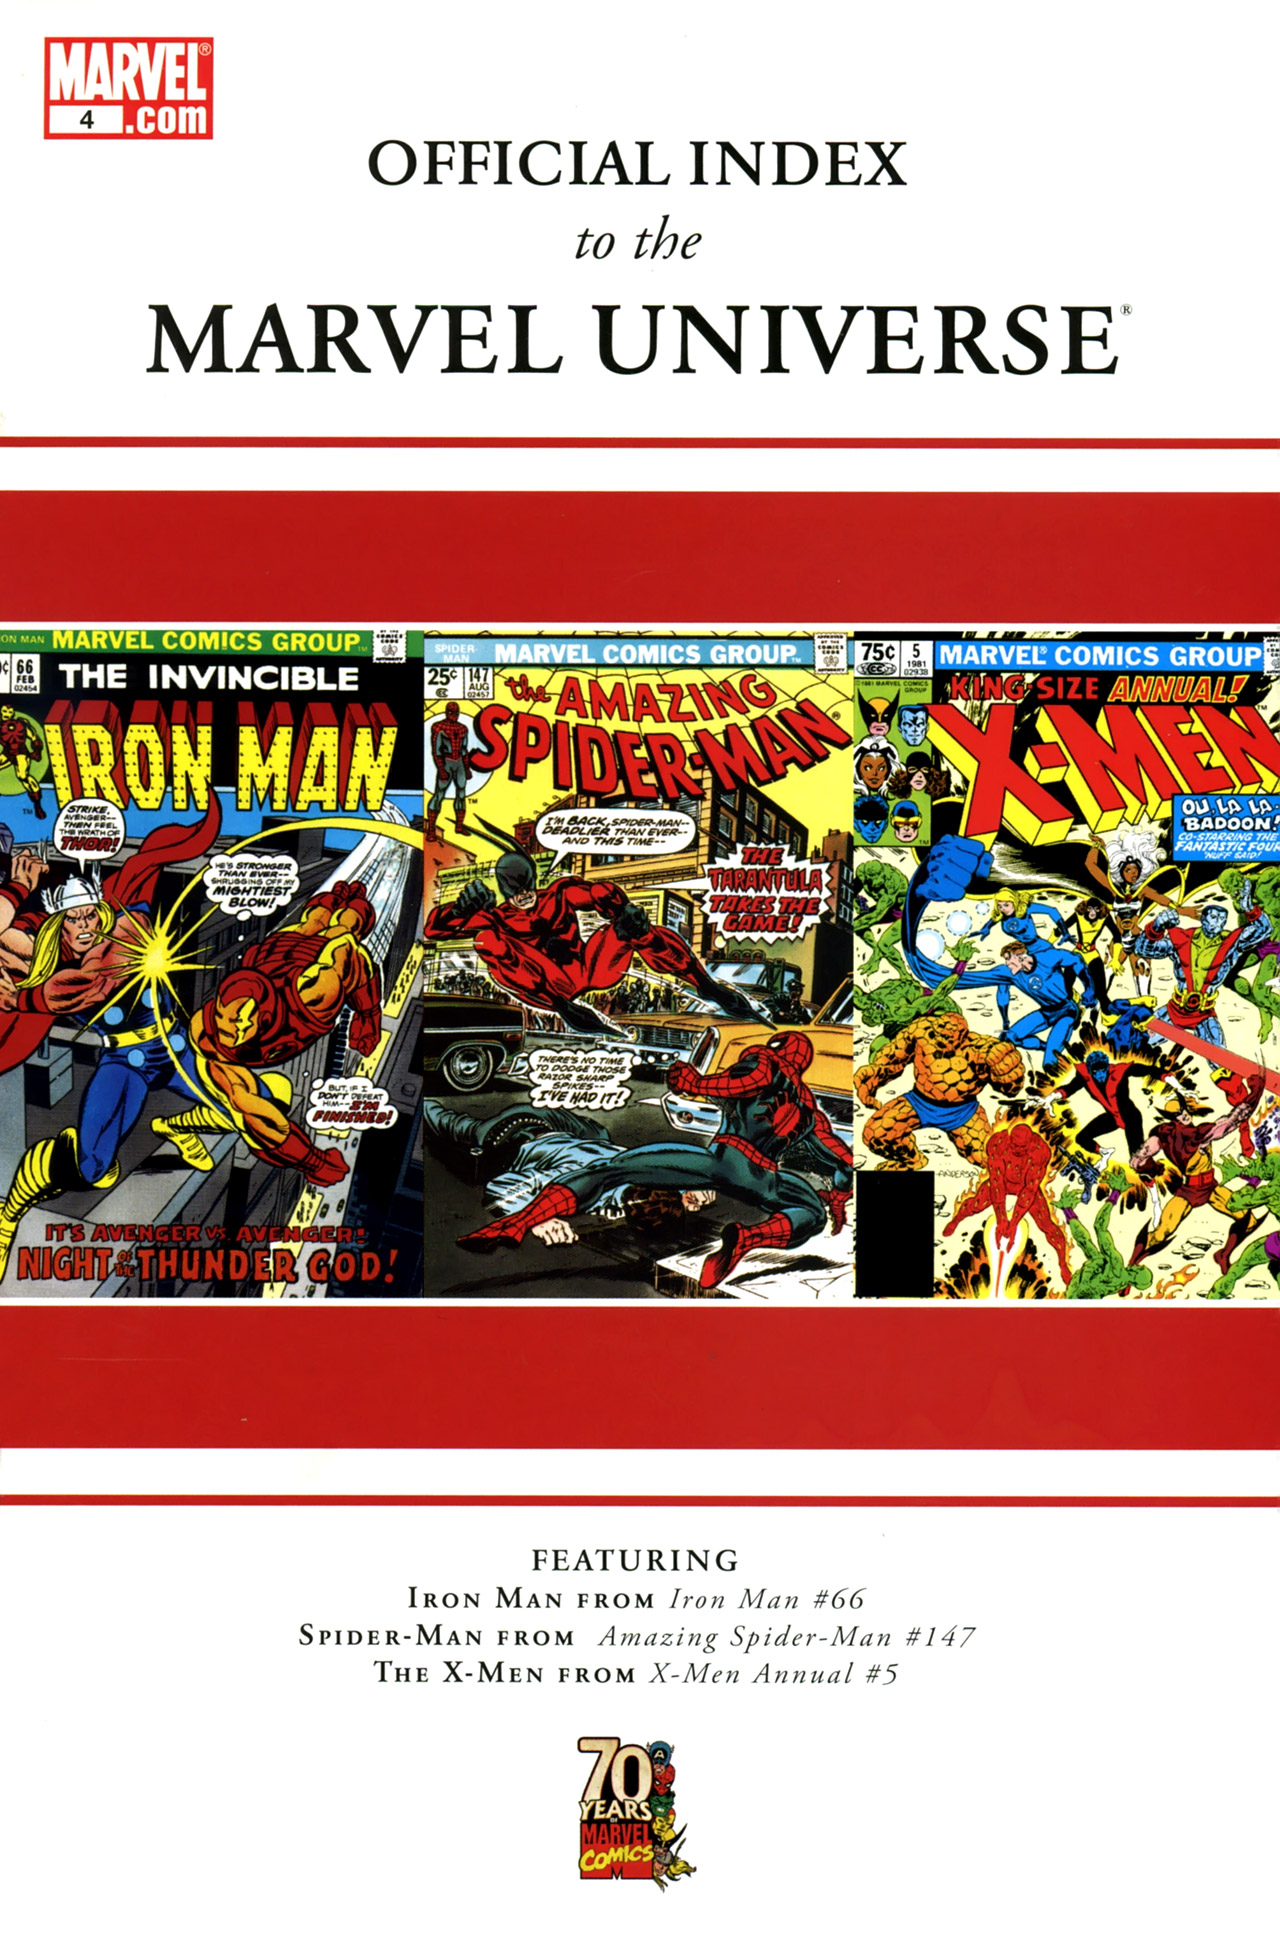 Read online Official Index to the Marvel Universe comic -  Issue #4 - 1